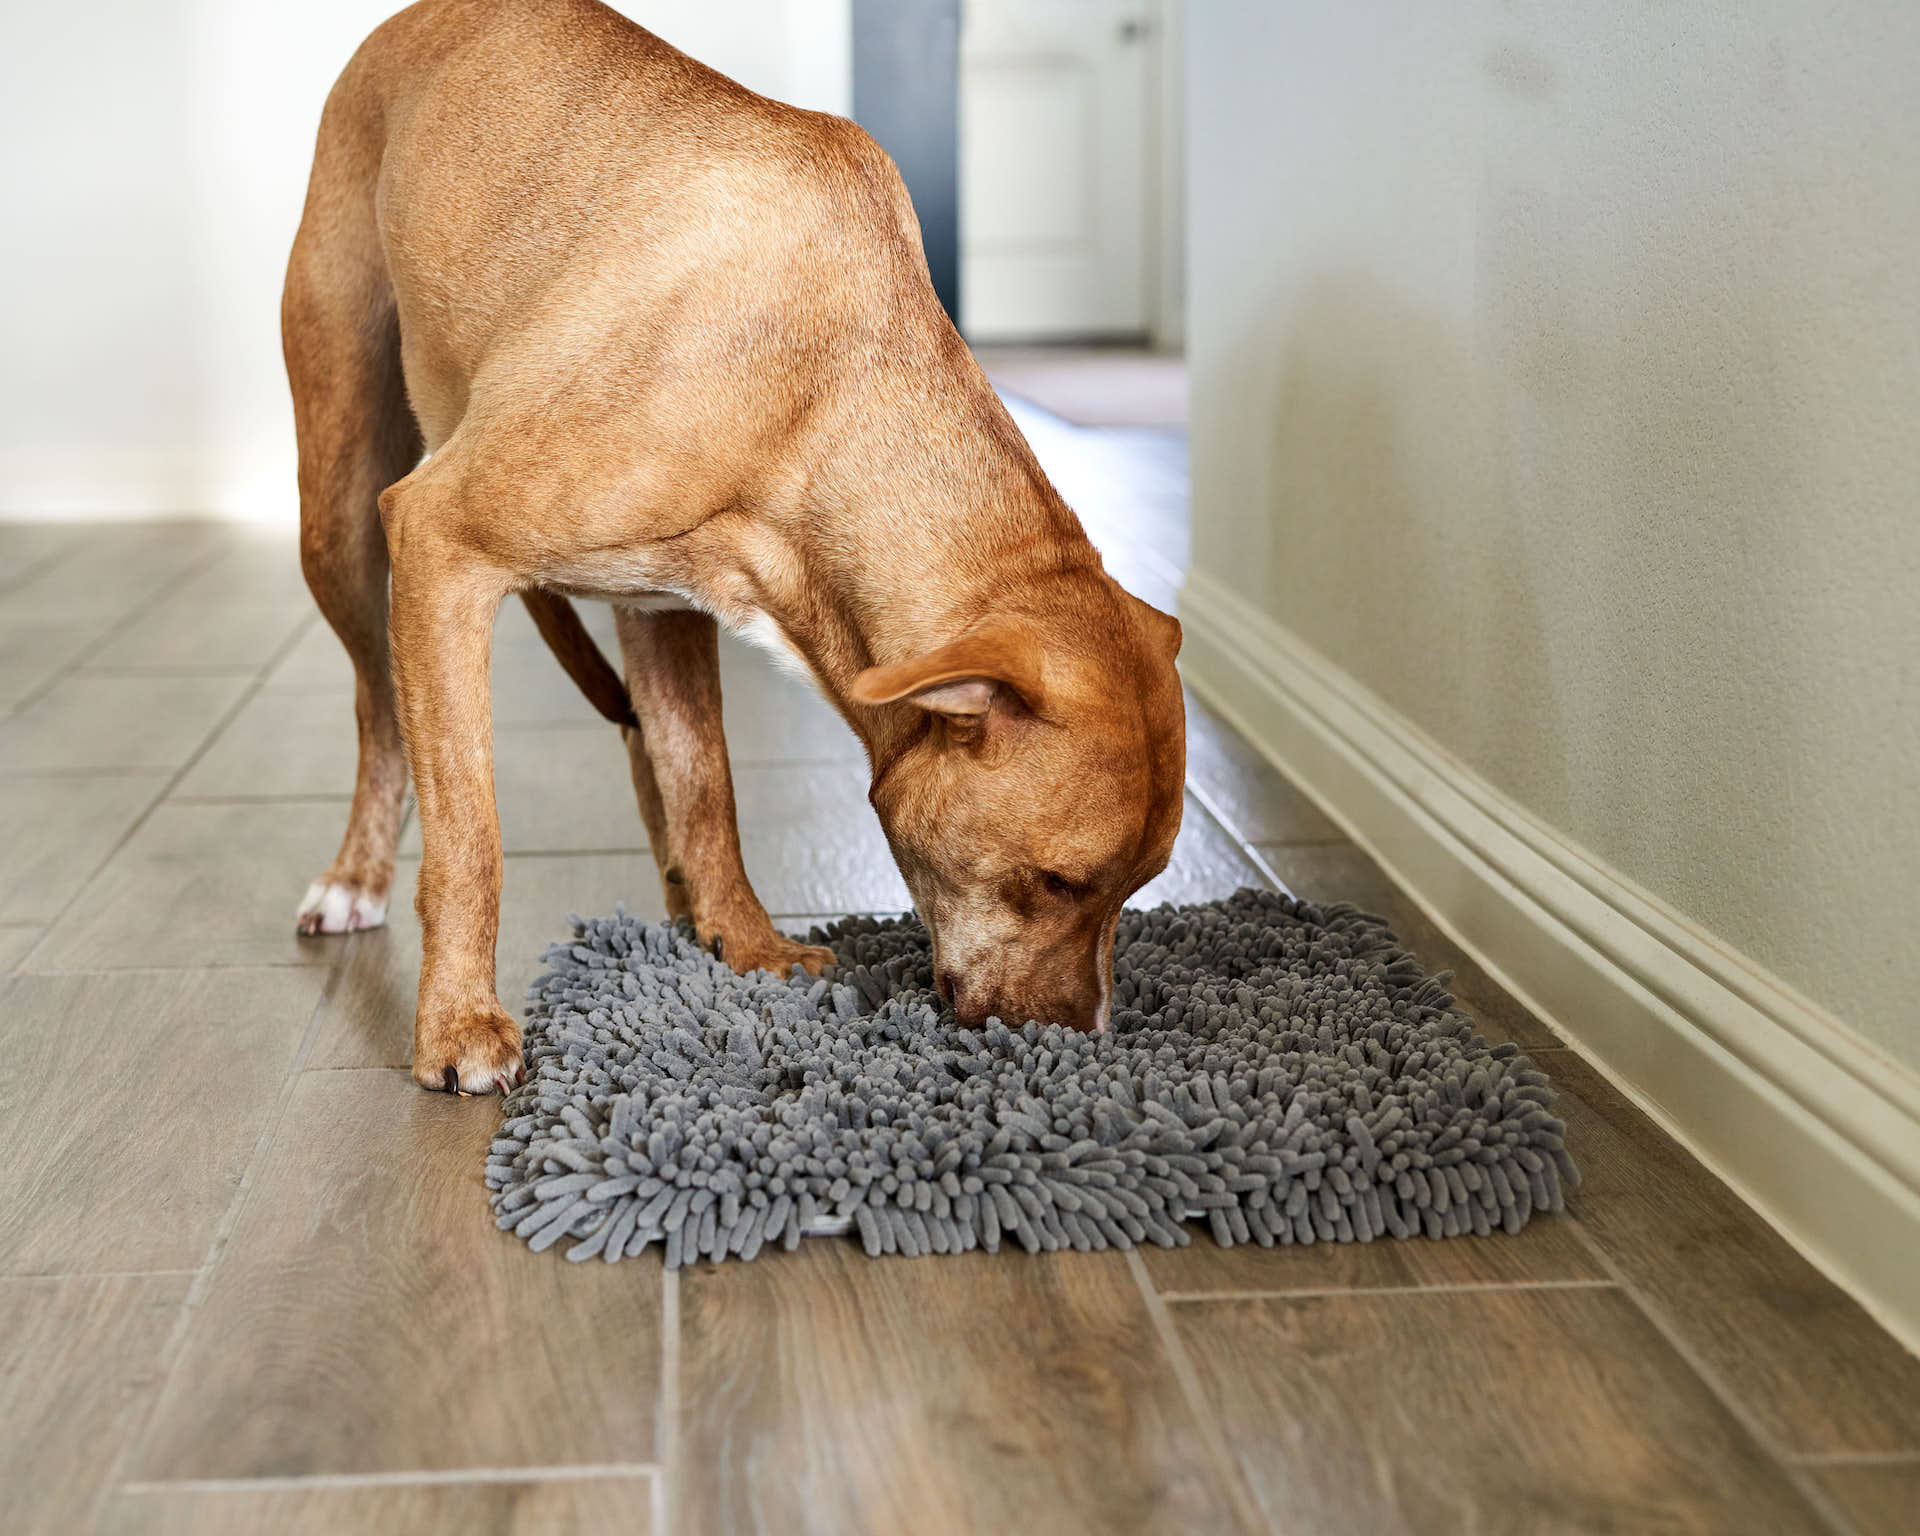 Dog Snuffle Mats: The Best Options for Slow Feeding, Enrichment, and More